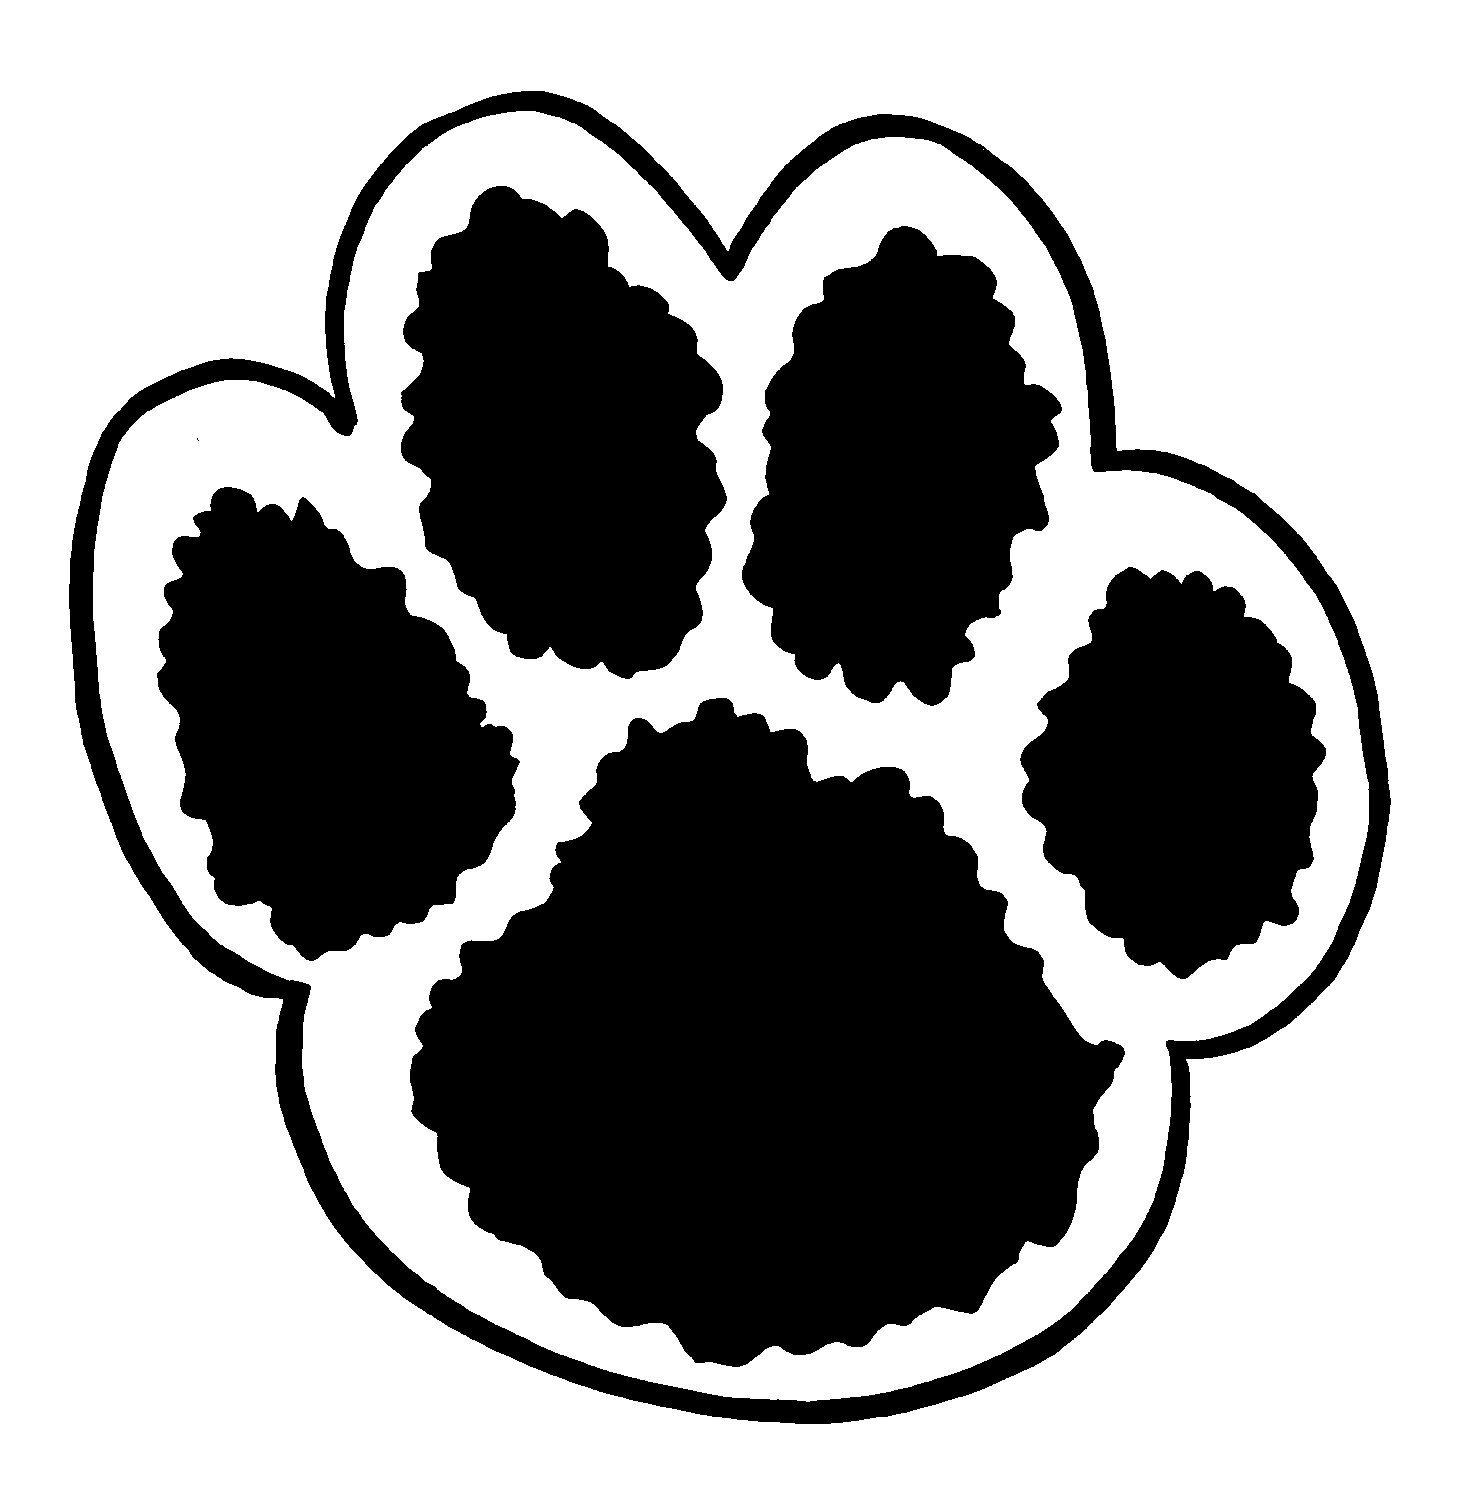 Bear Paw Prints - Clipart library